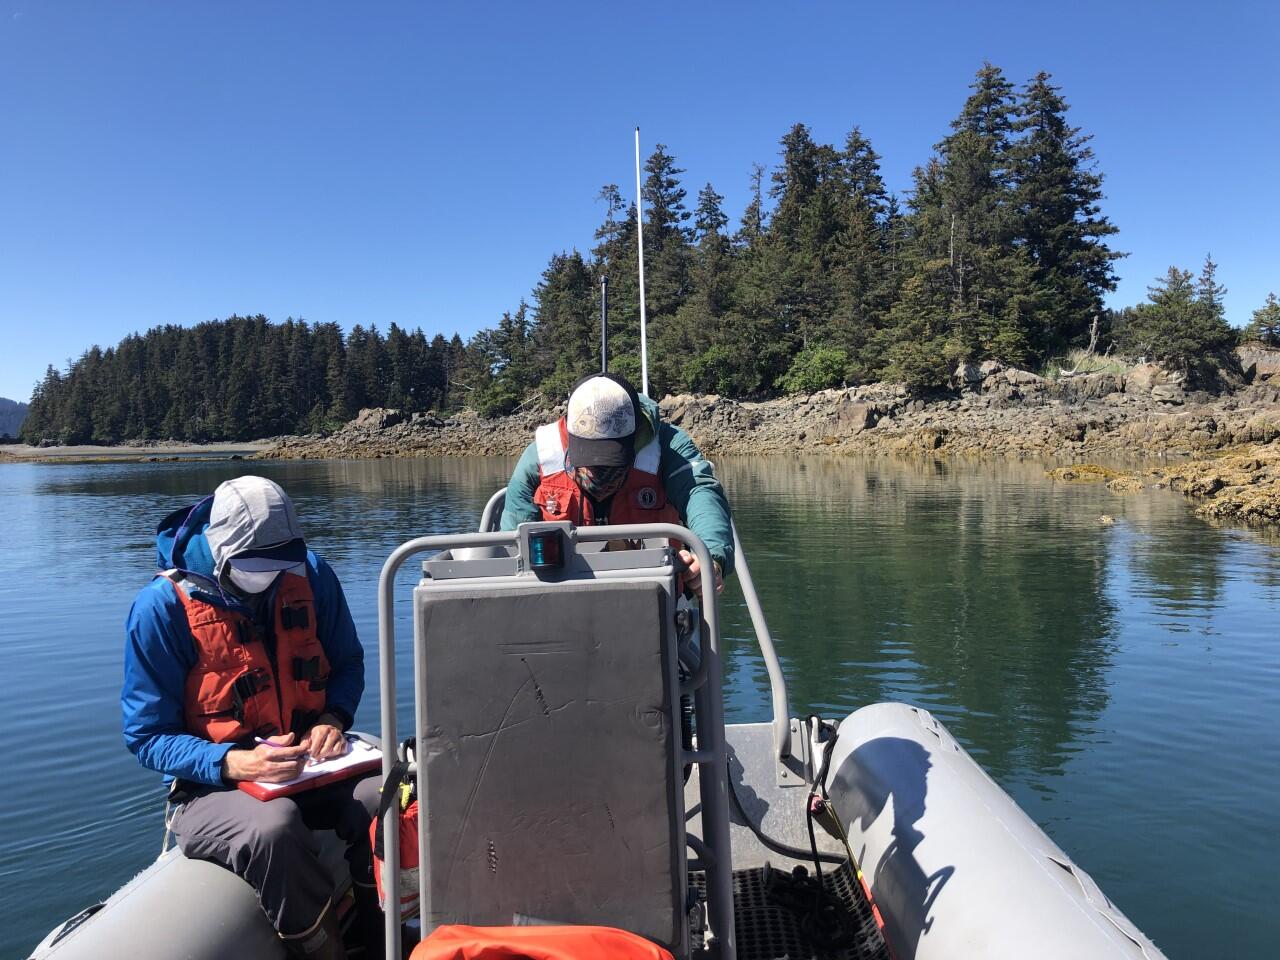 Scientists in boat record observations along nearshore transects in Kachemak Bay, Alaska